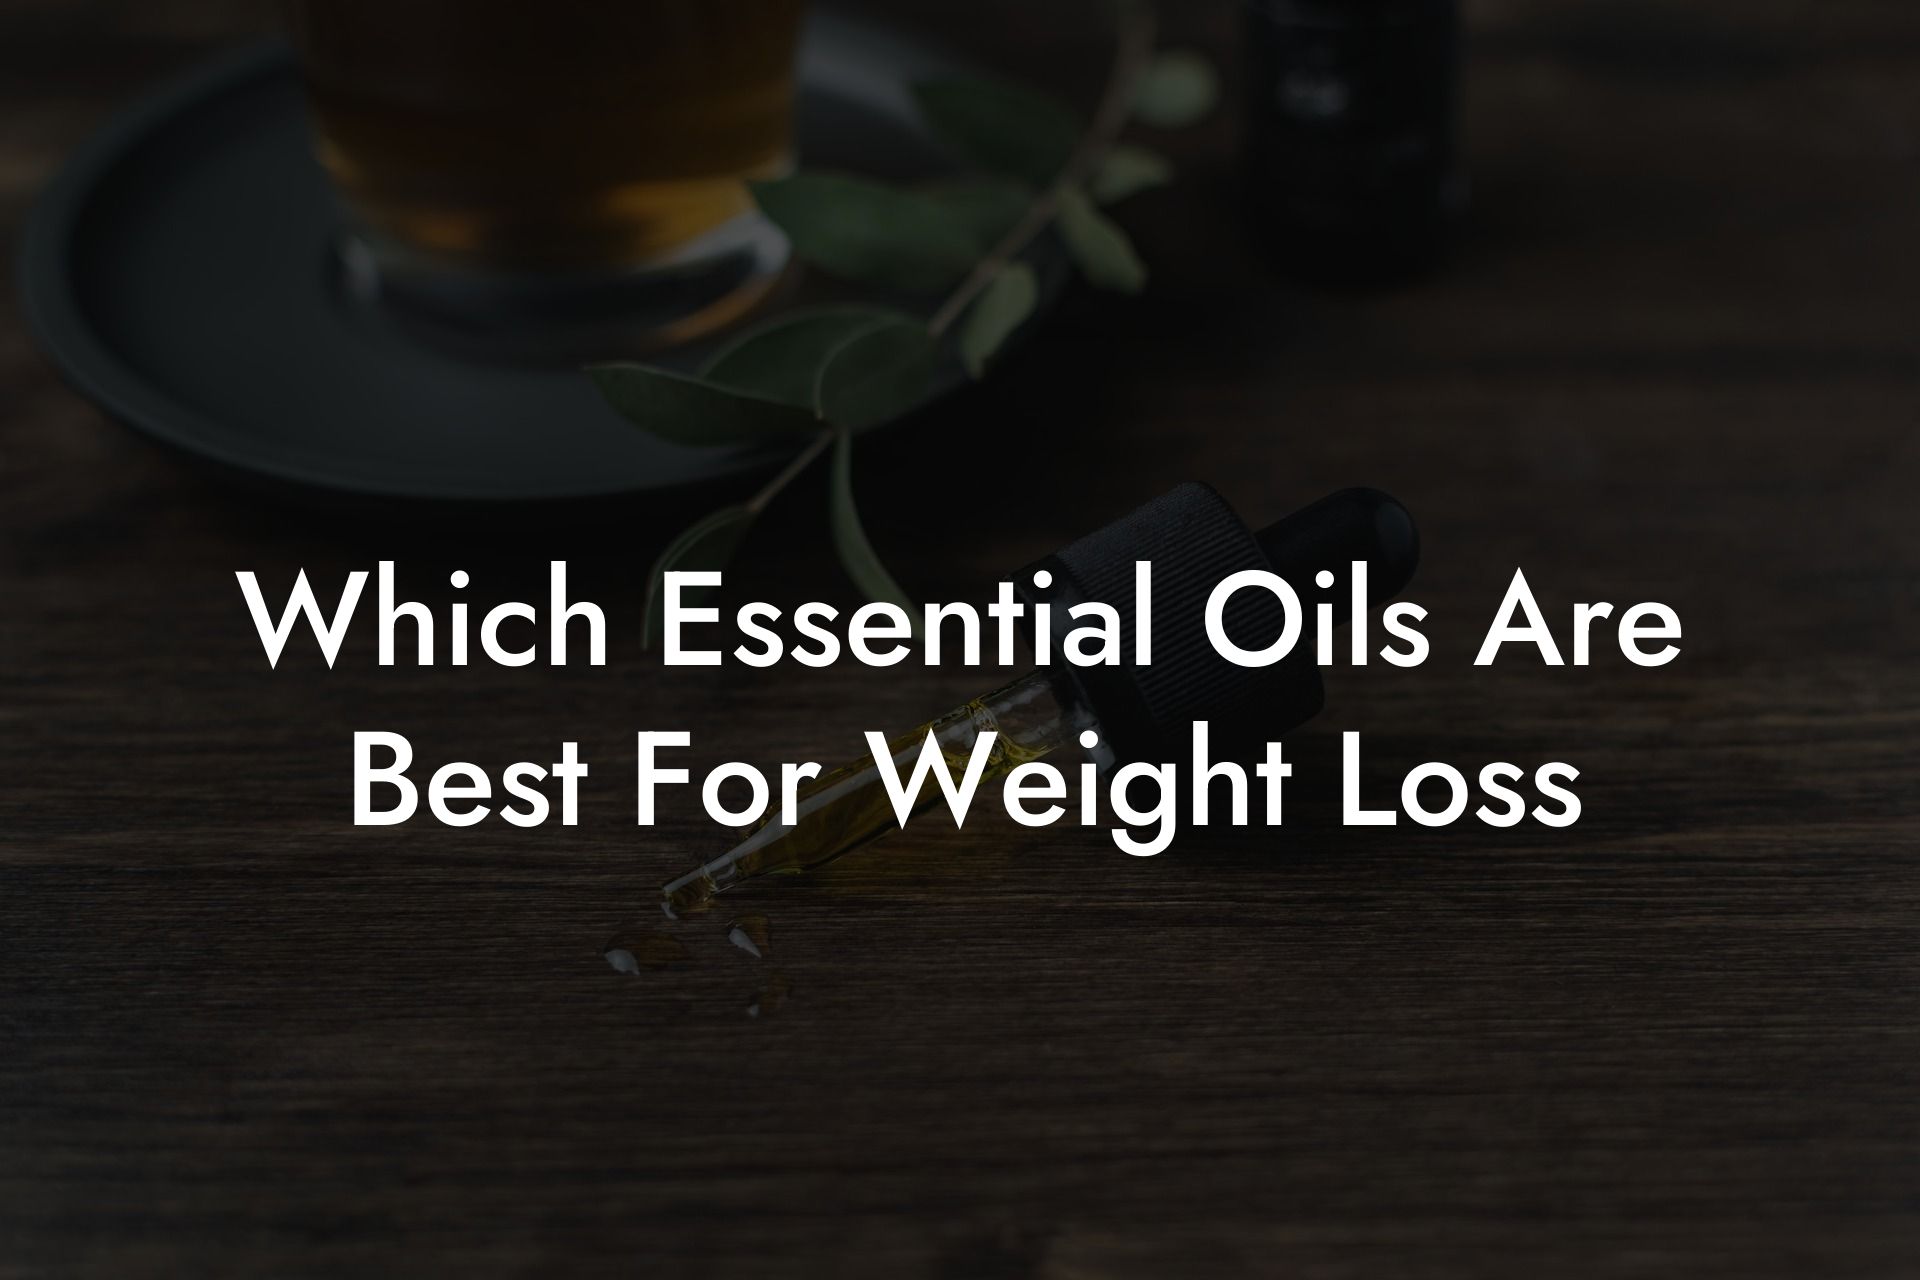 Which Essential Oils Are Best For Weight Loss